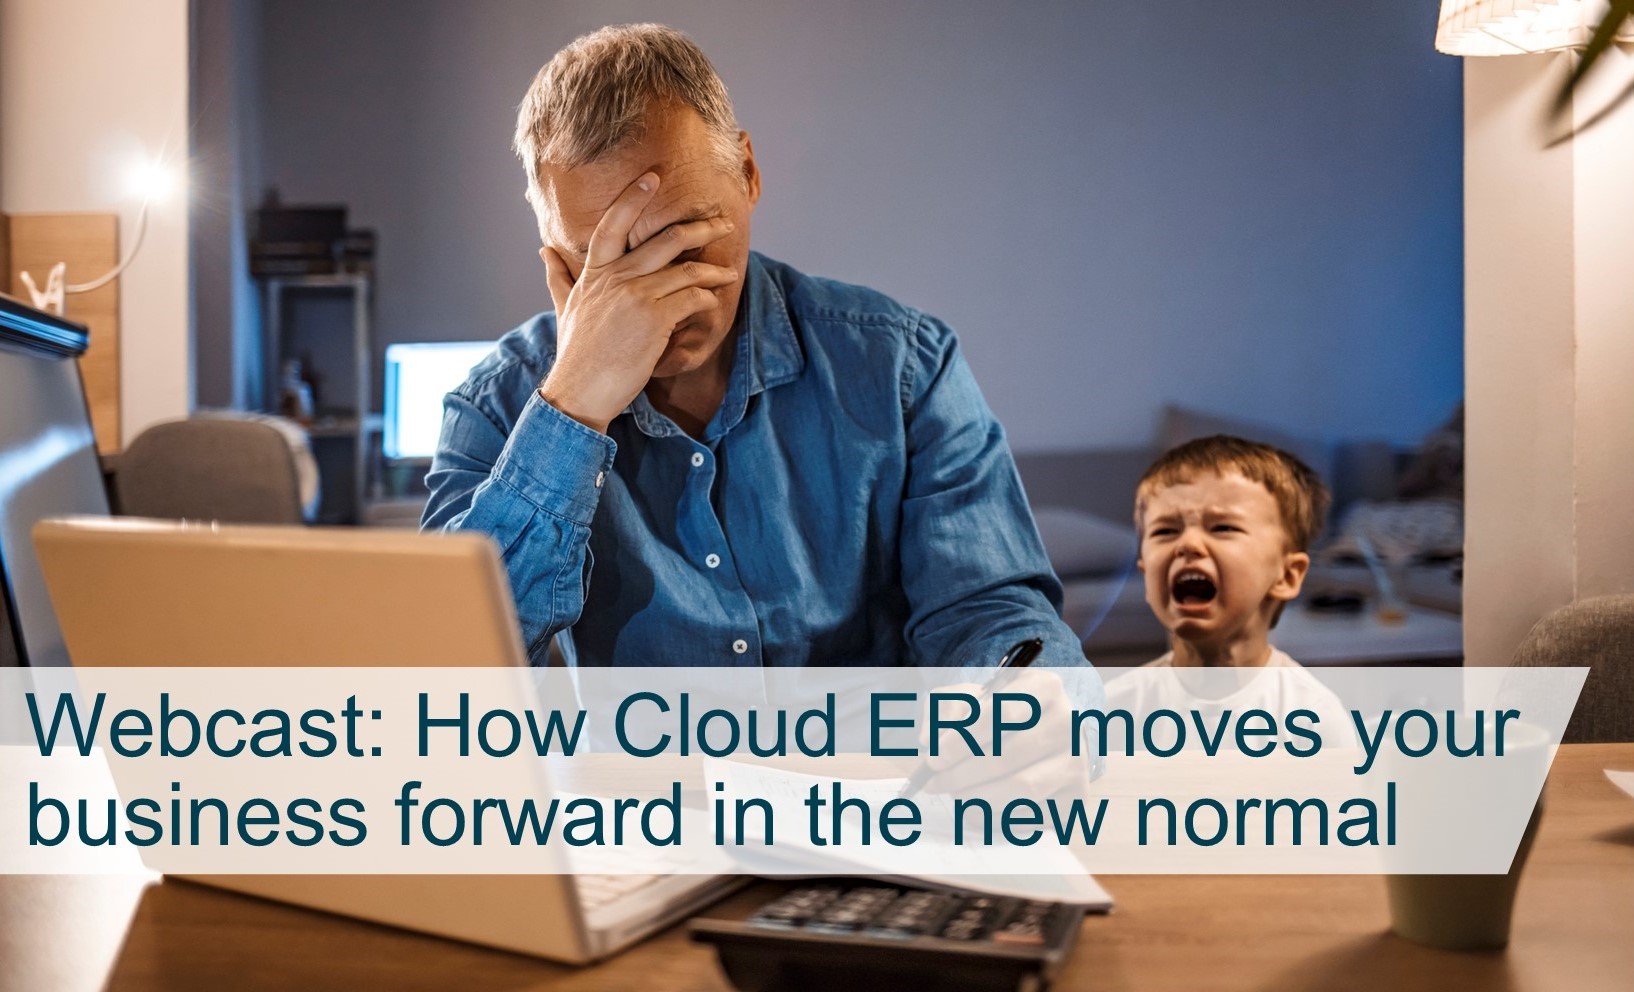 Webcast: How Cloud ERP moves your business forward in the new normal